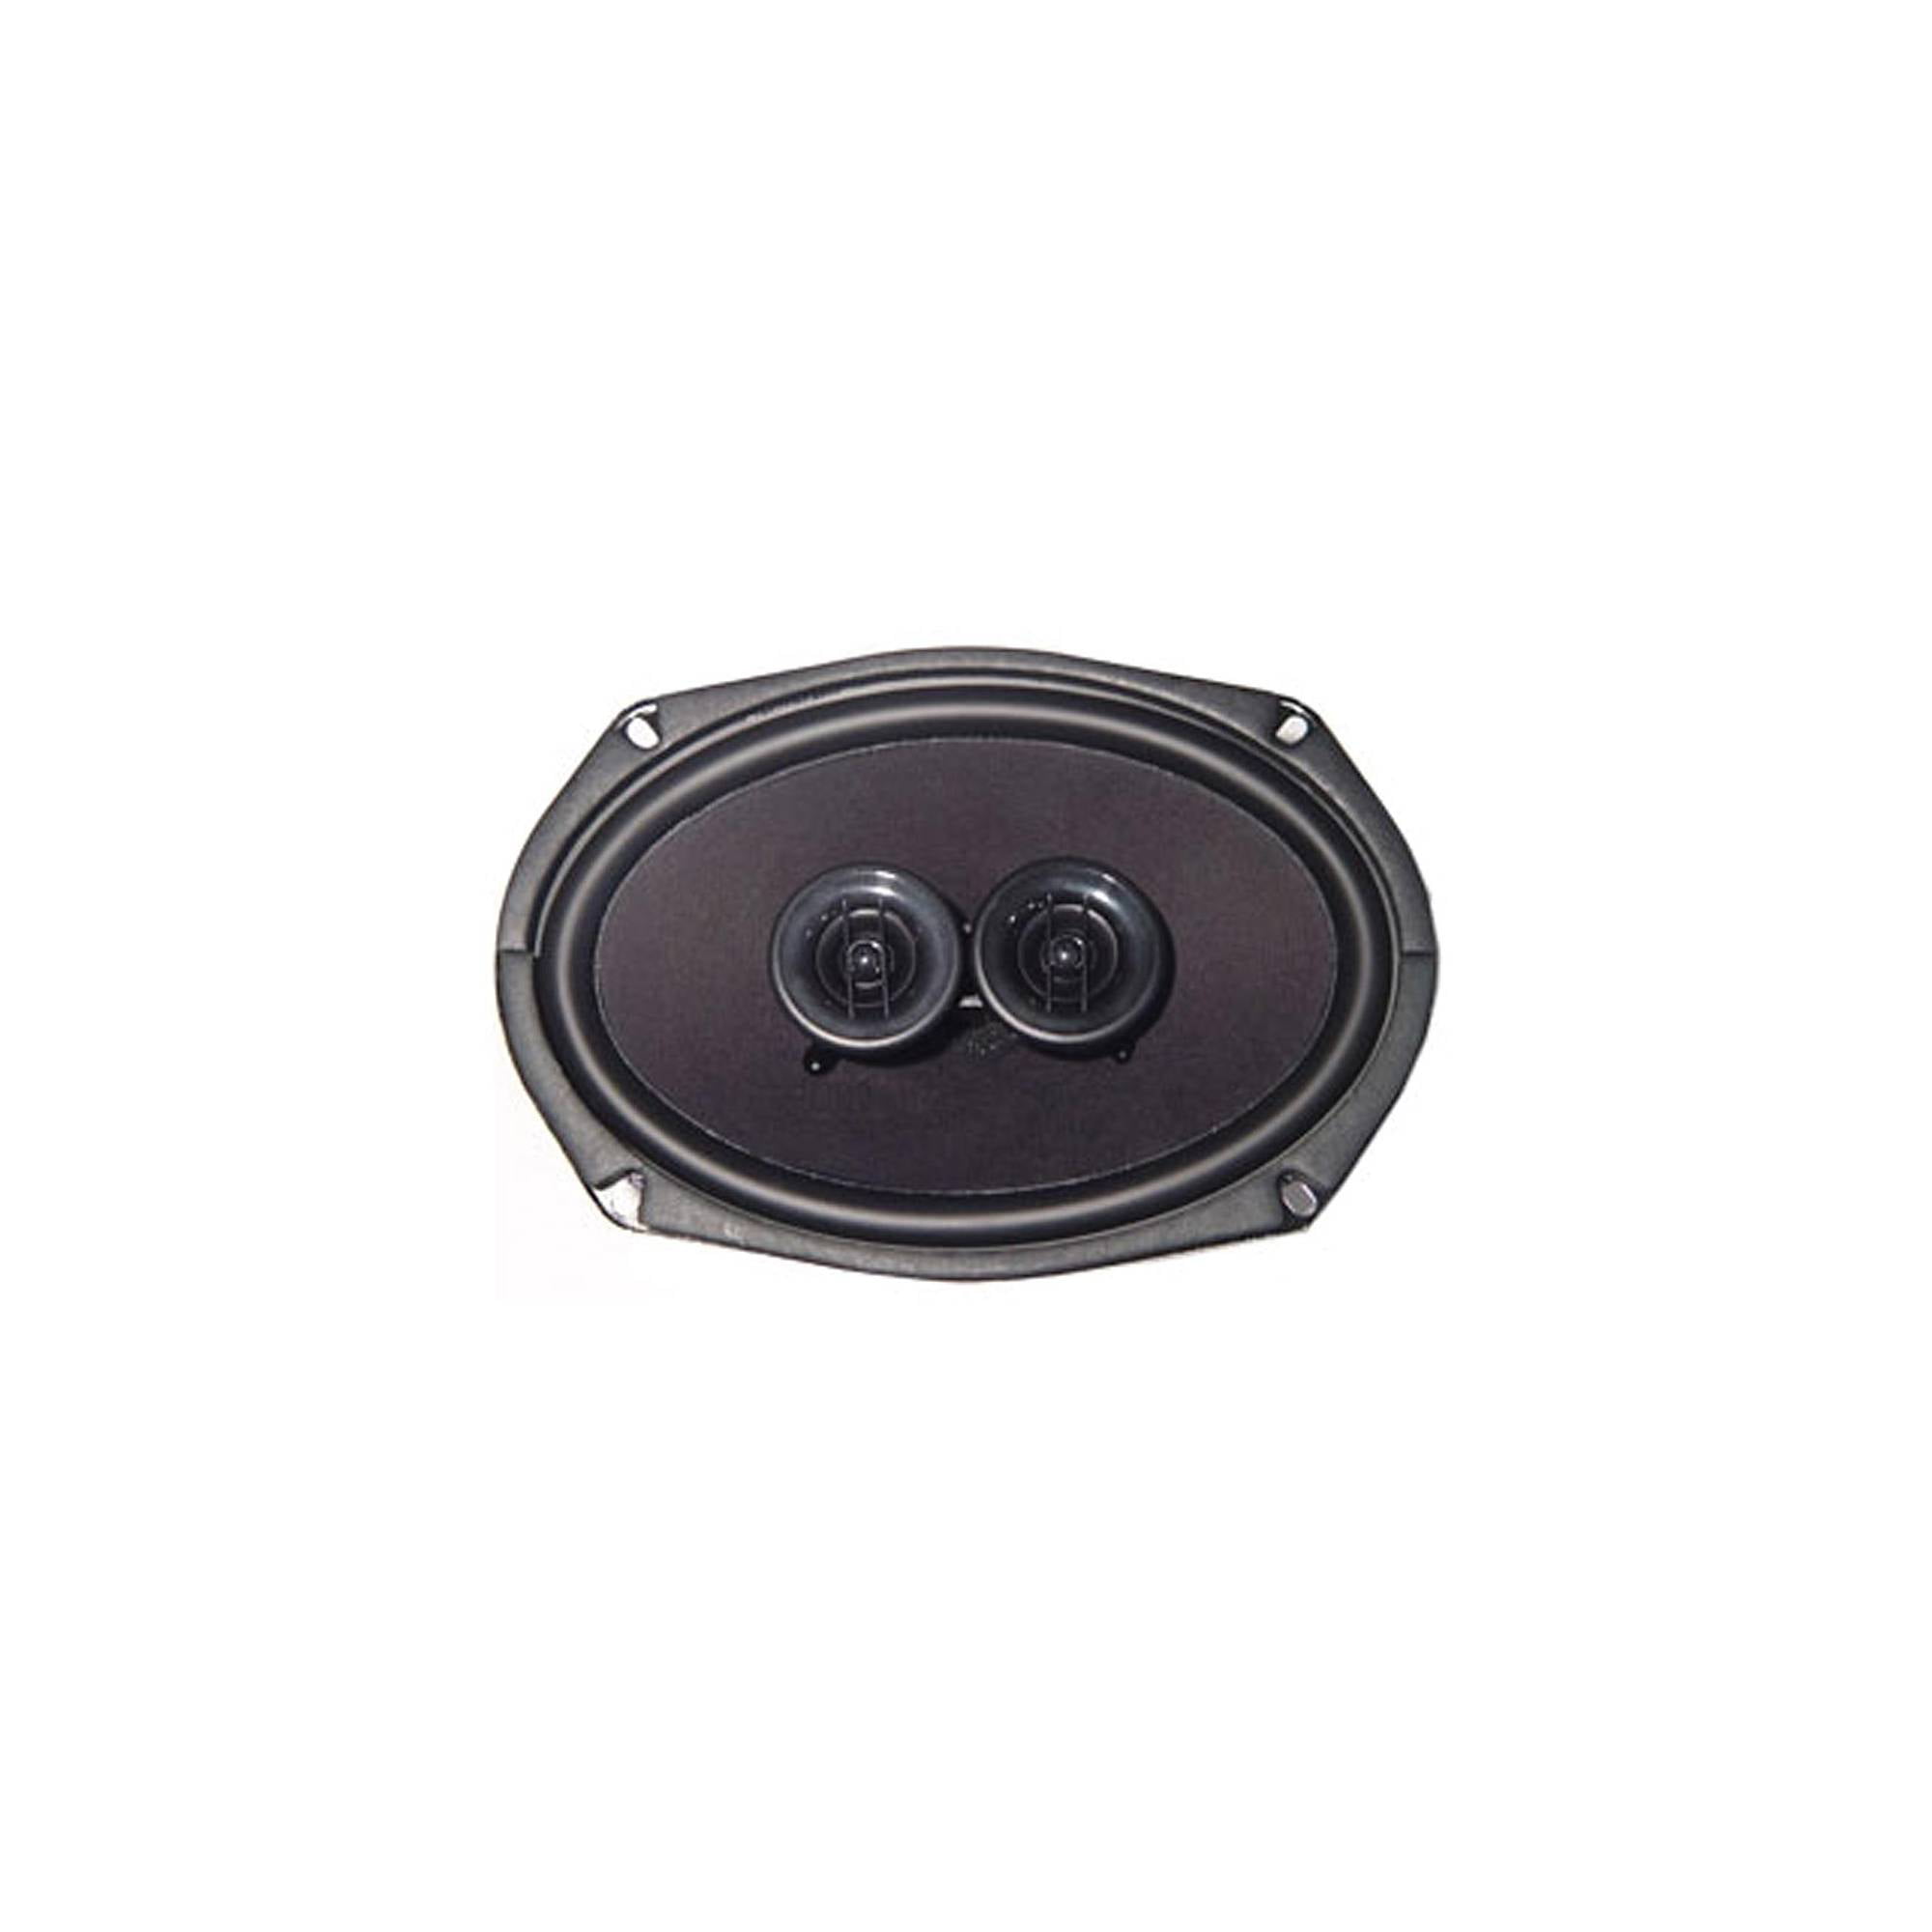 Dual Voice Coil hook up